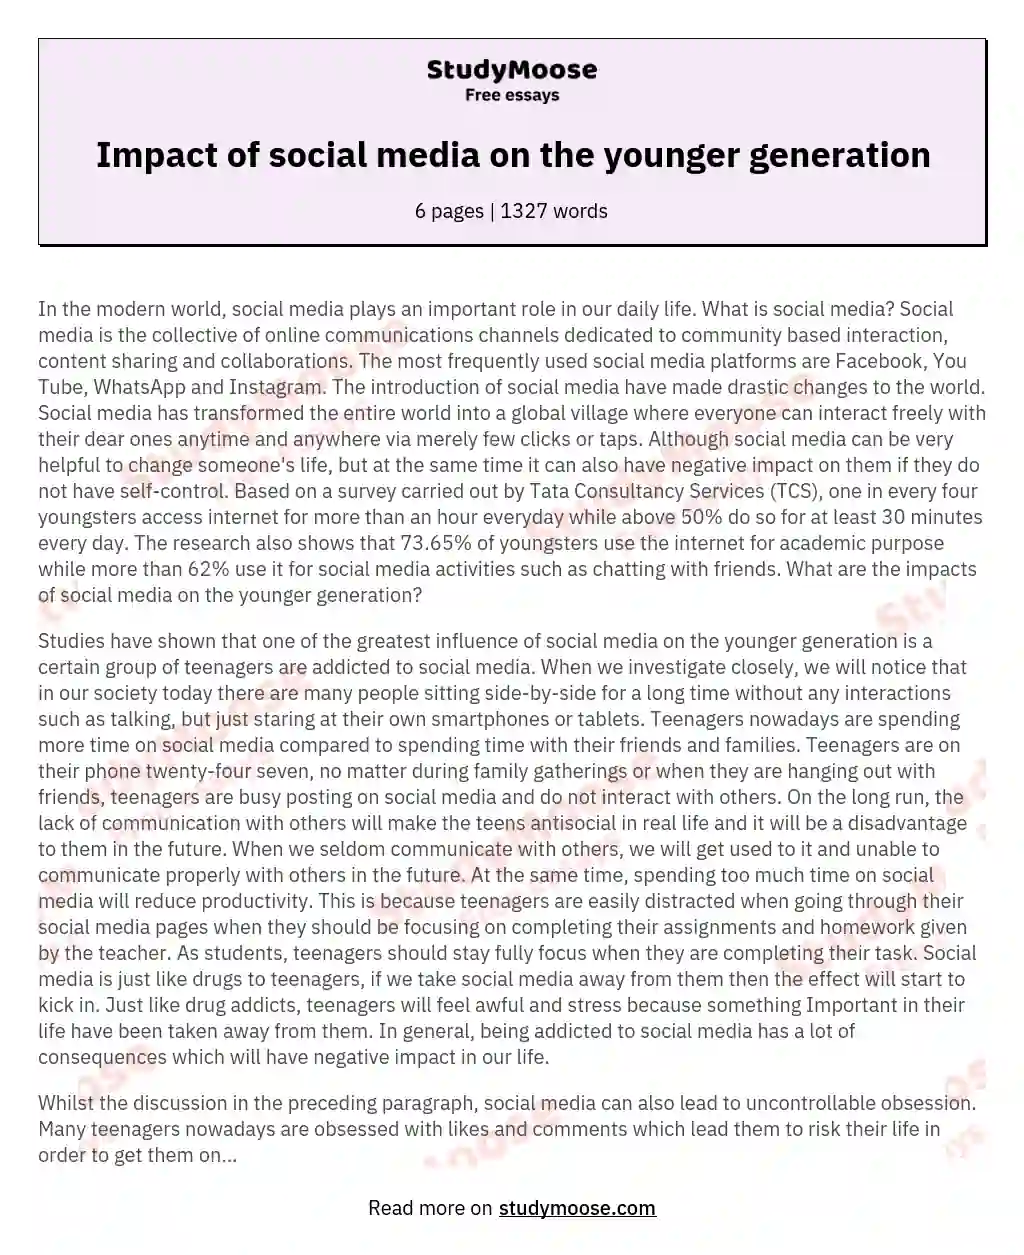 Impact of social media on the younger generation essay